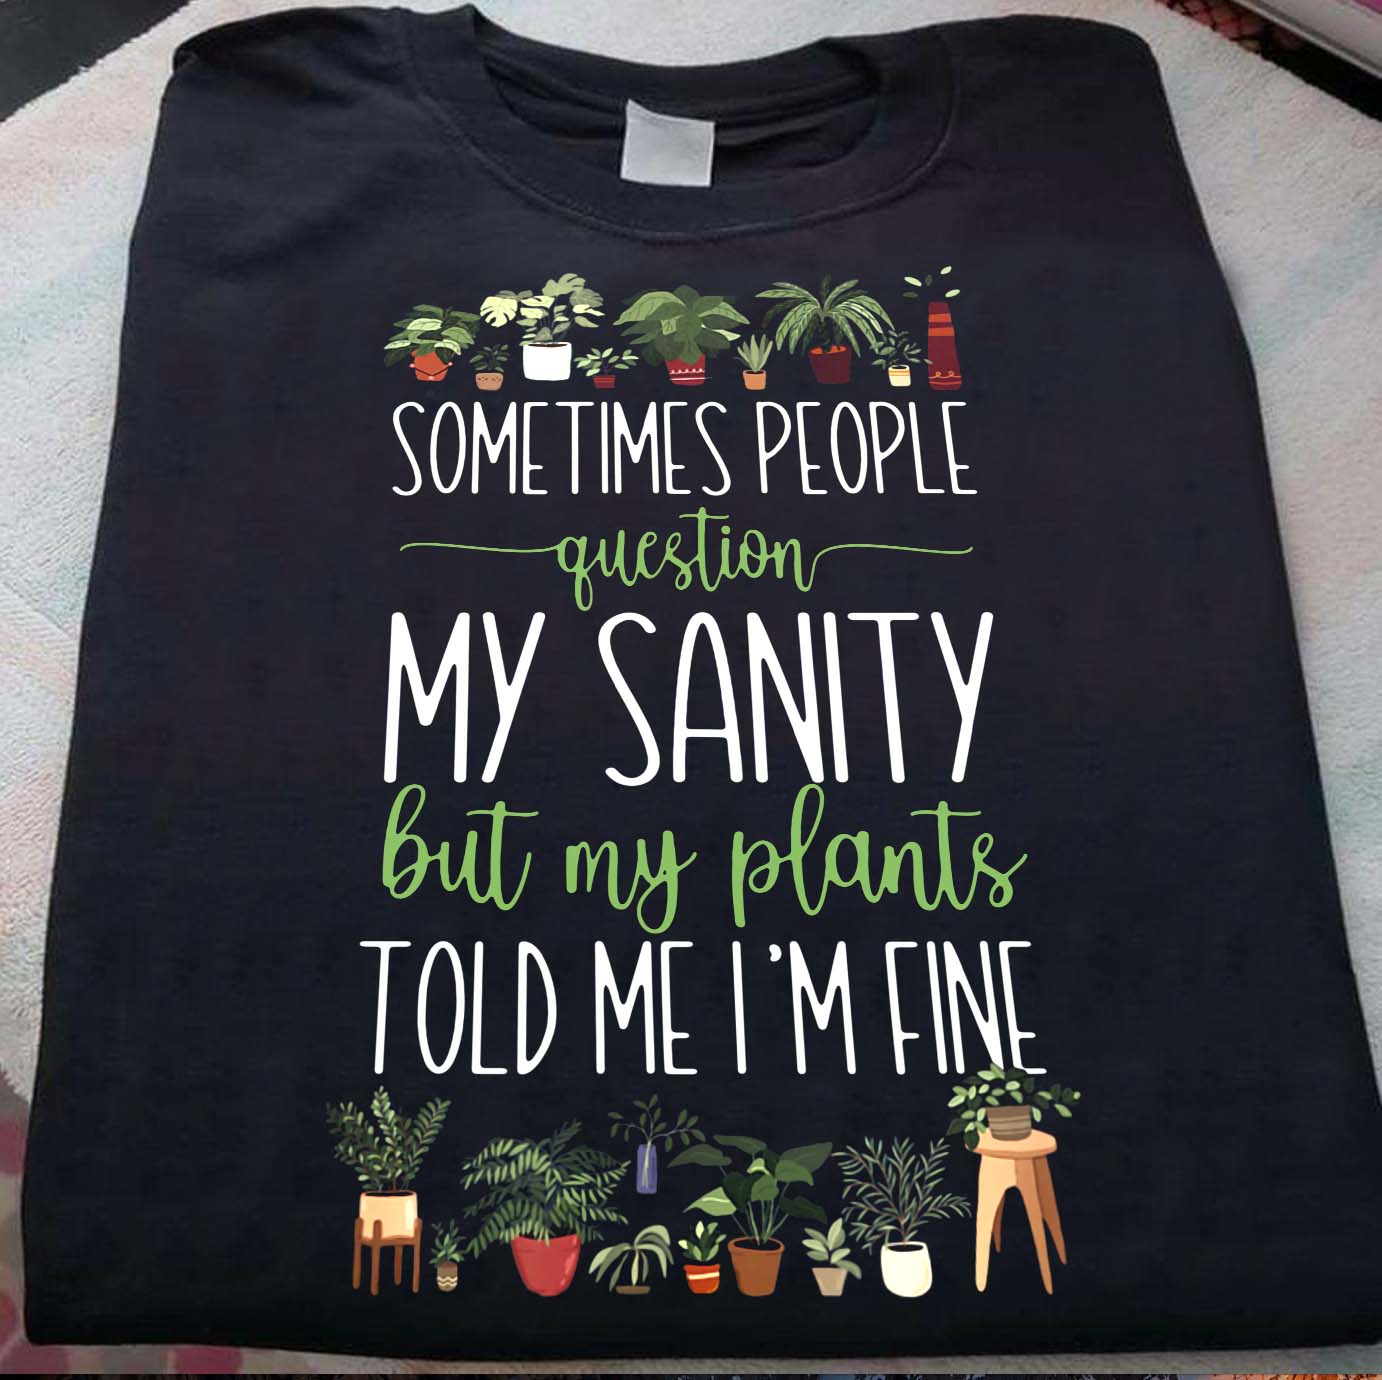 Sometimes people question my sanity but my plants told me I'm fine - Plants lover